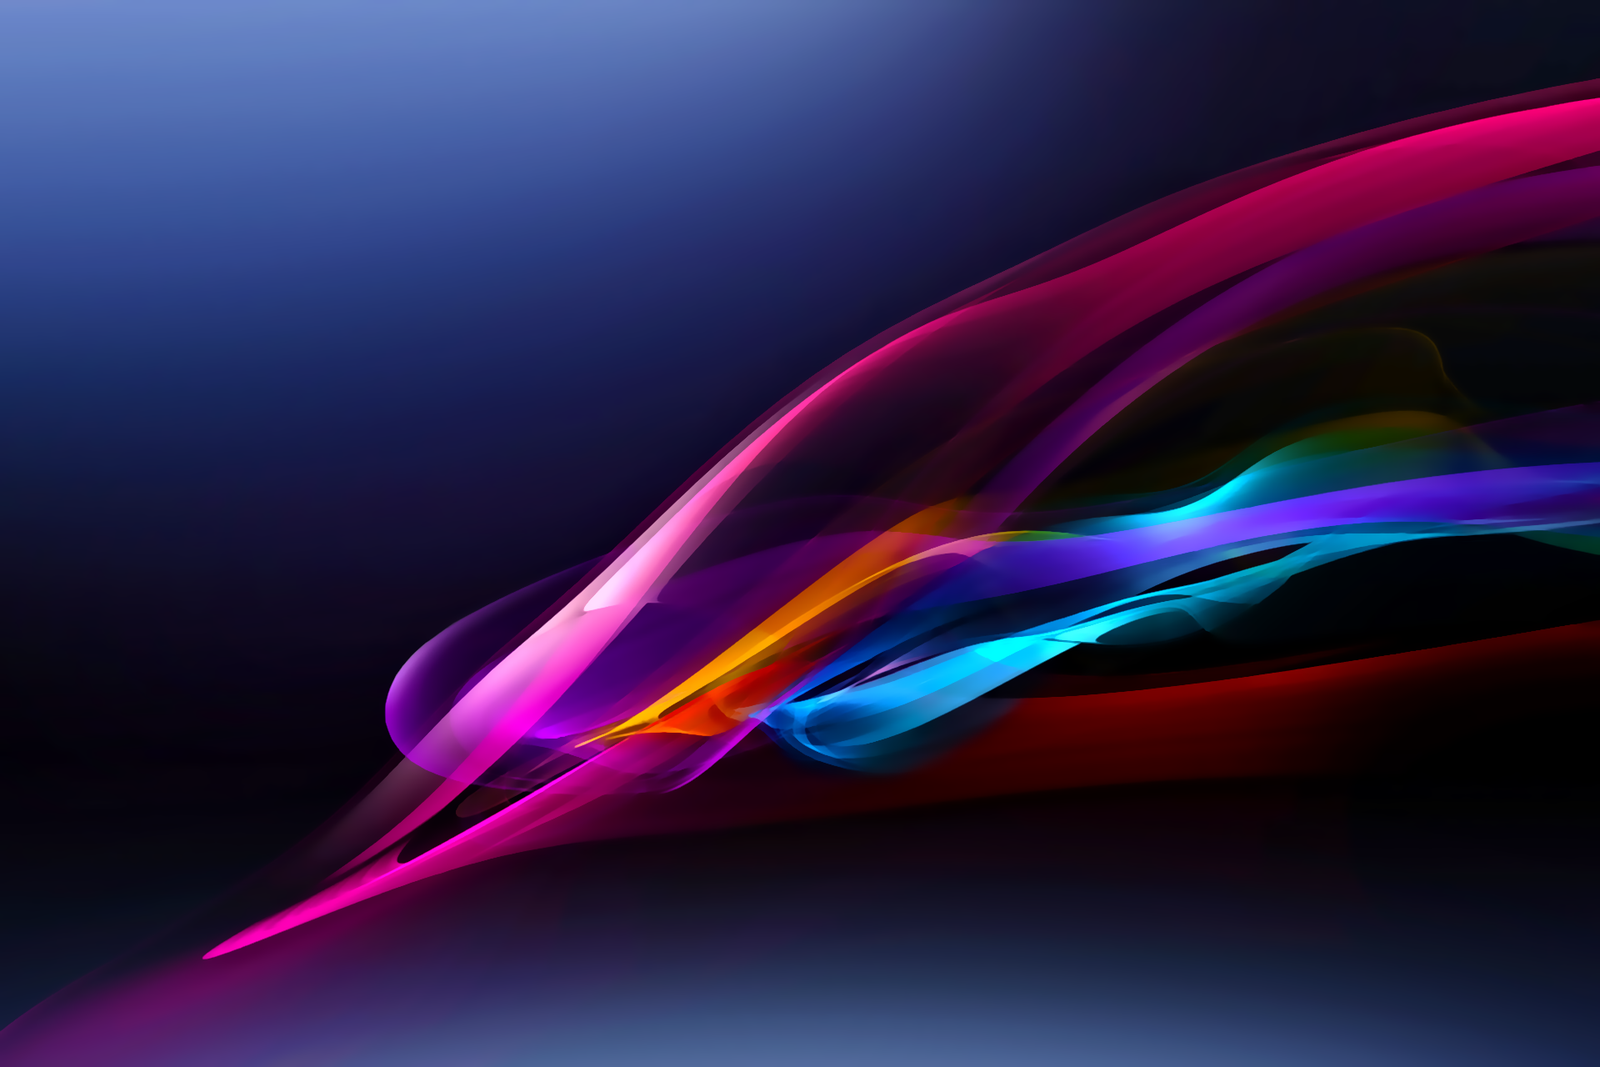 Xperia Z Ultra HD Default Wallpaper For S4 By Kingwicked